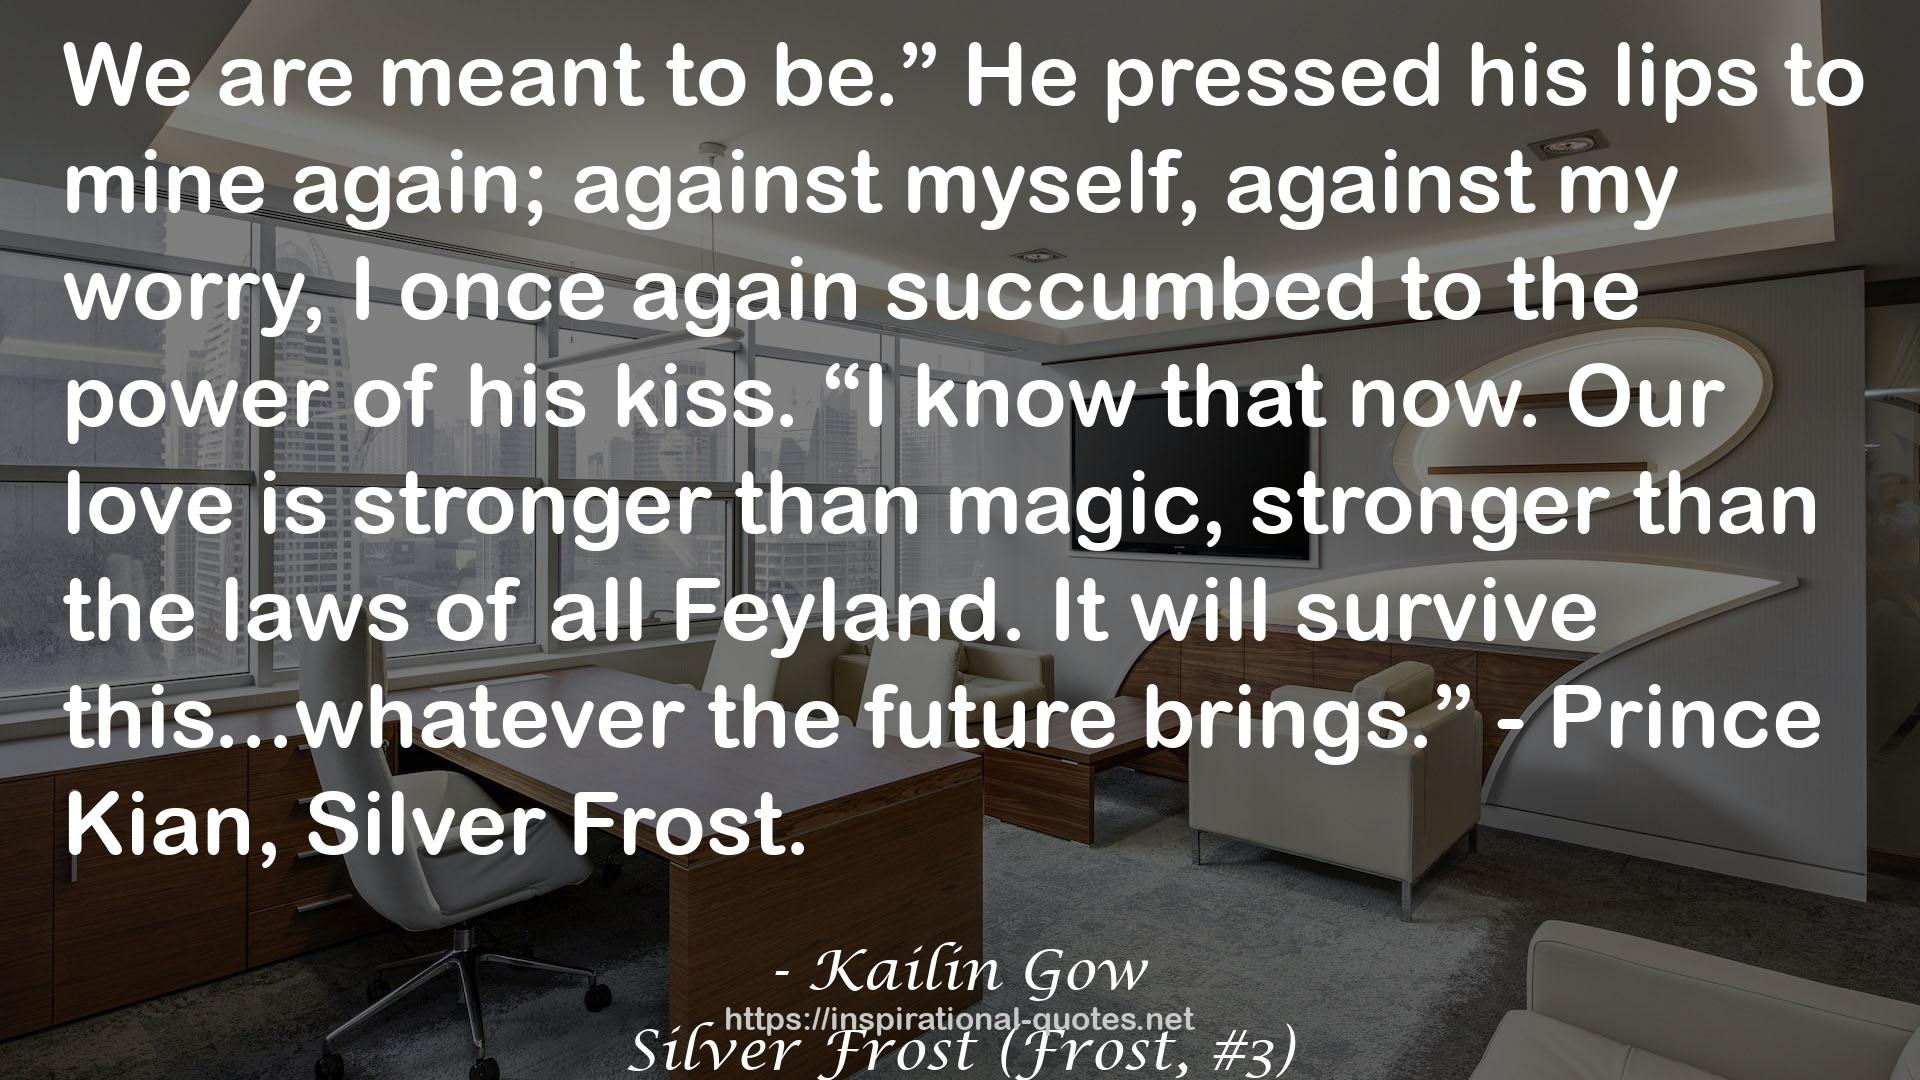 Silver Frost (Frost, #3) QUOTES